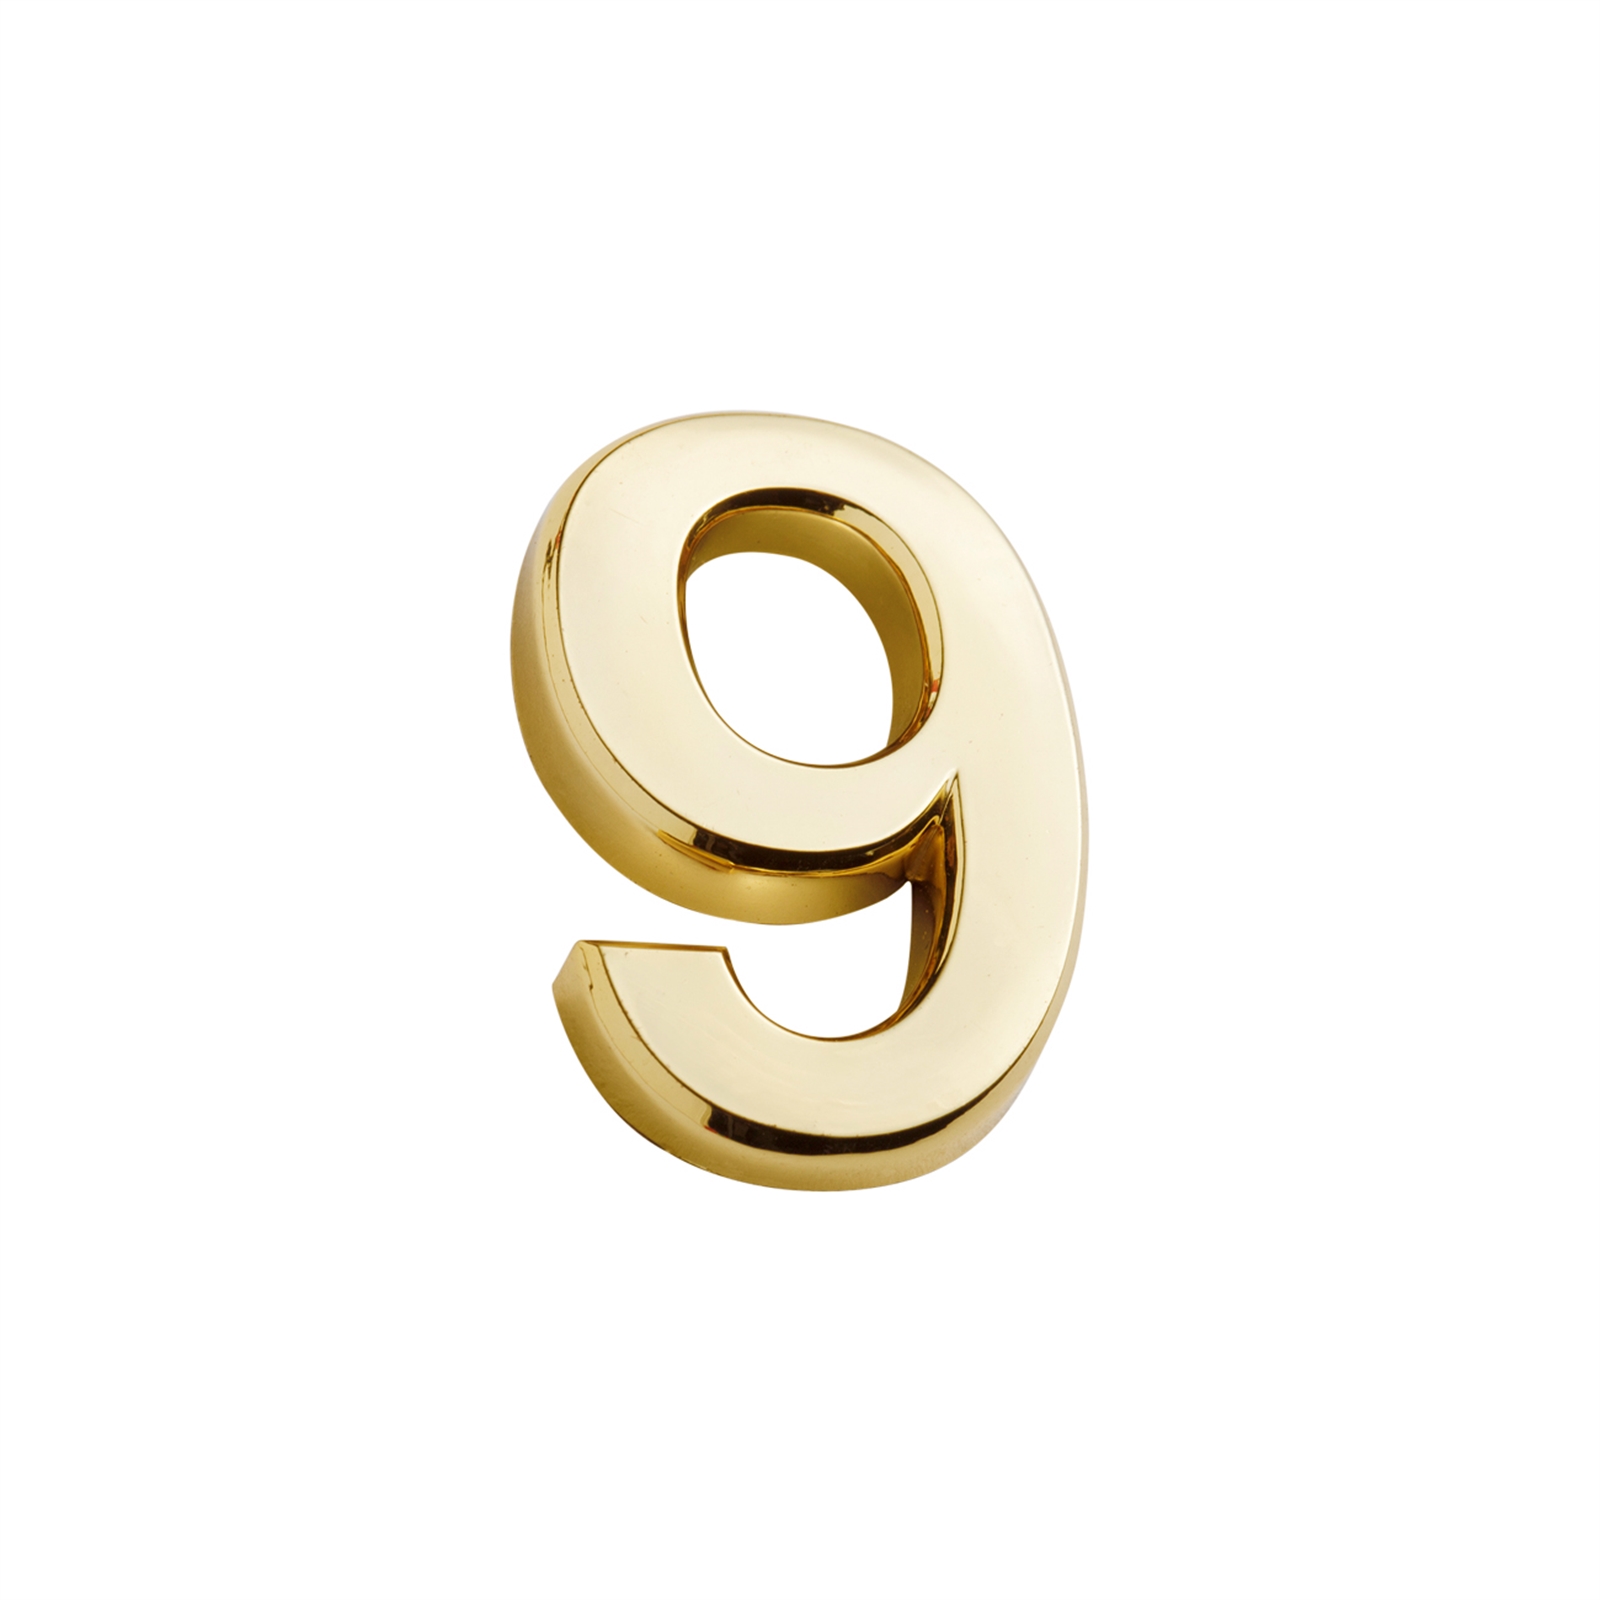 Sandleford 35mm 9 Gold Self Adhesive Harbour Numeral